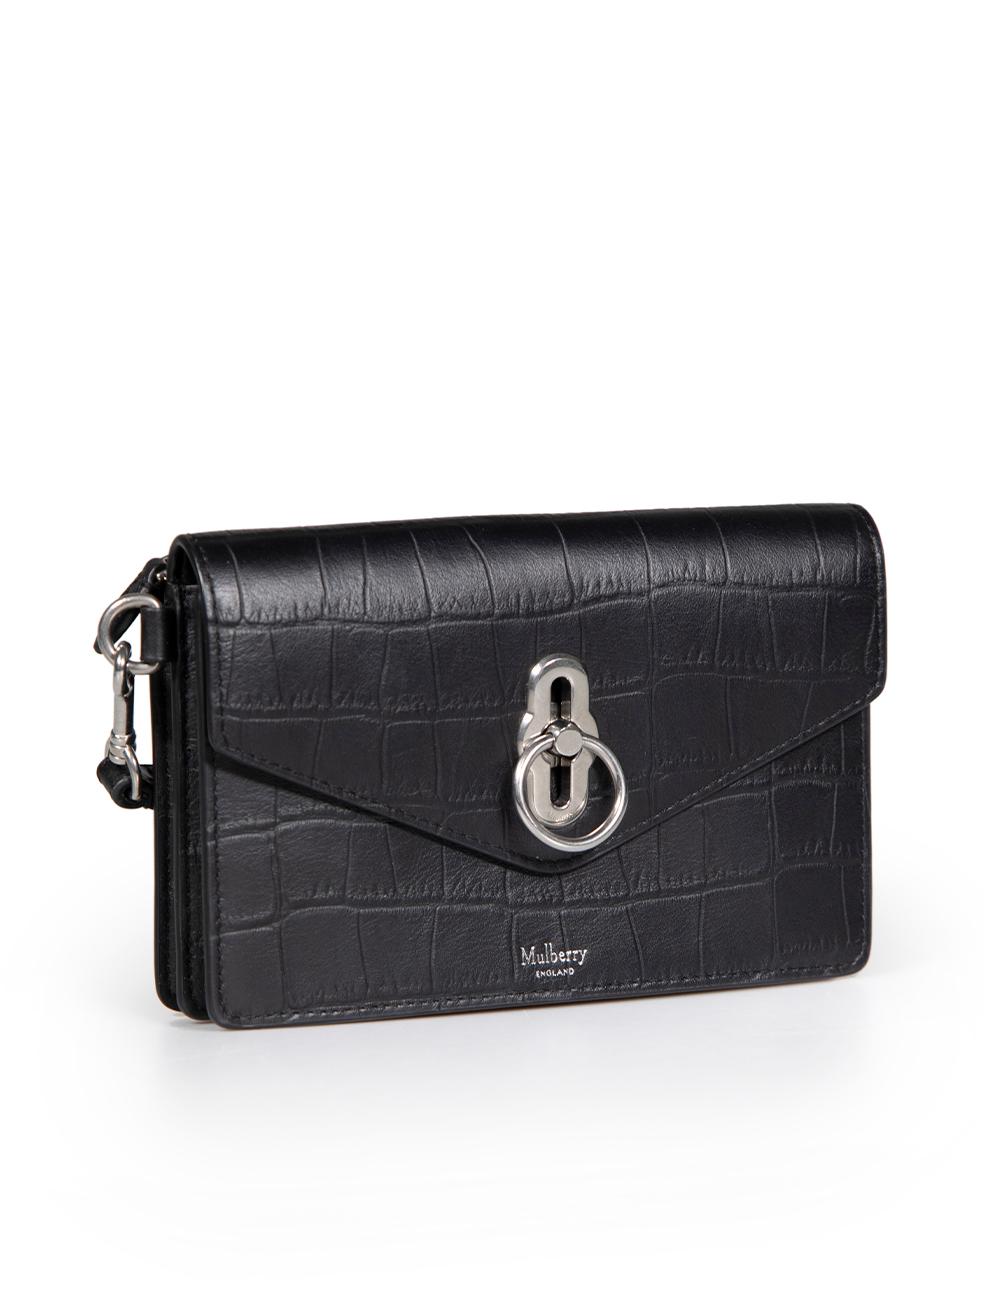 CONDITION is Very good. Minimal wear to bag is evident. Minimal wear to the front fastening hardware with light scratches to the metal on this used Mulberry designer resale item.
 
 
 
 Details
 
 
 Amberley model
 
 Black
 
 Leather
 
 Mini clutch